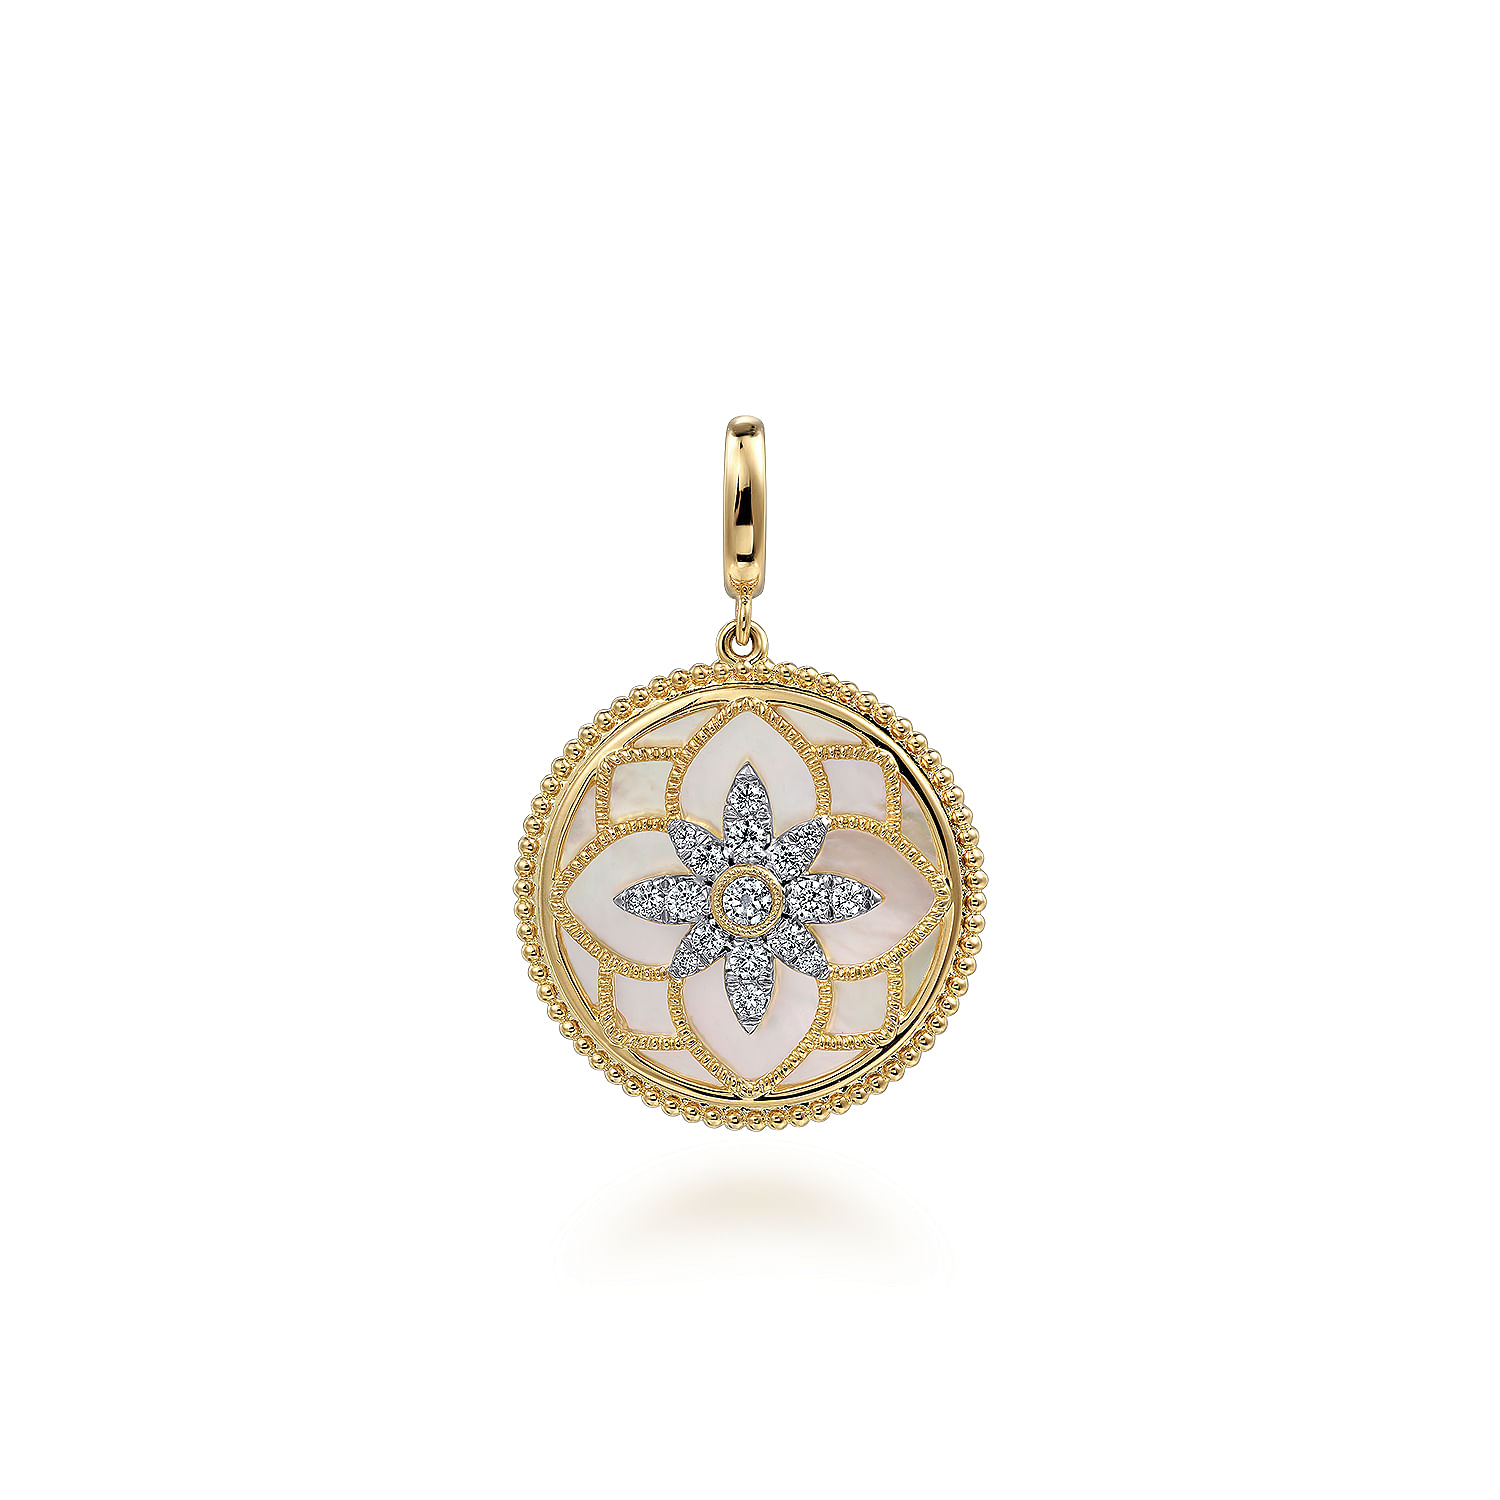 Gabriel - 14K Yellow Gold Bujukan Diamond and Mother of Pearl Medallion Pendant in size 24mm